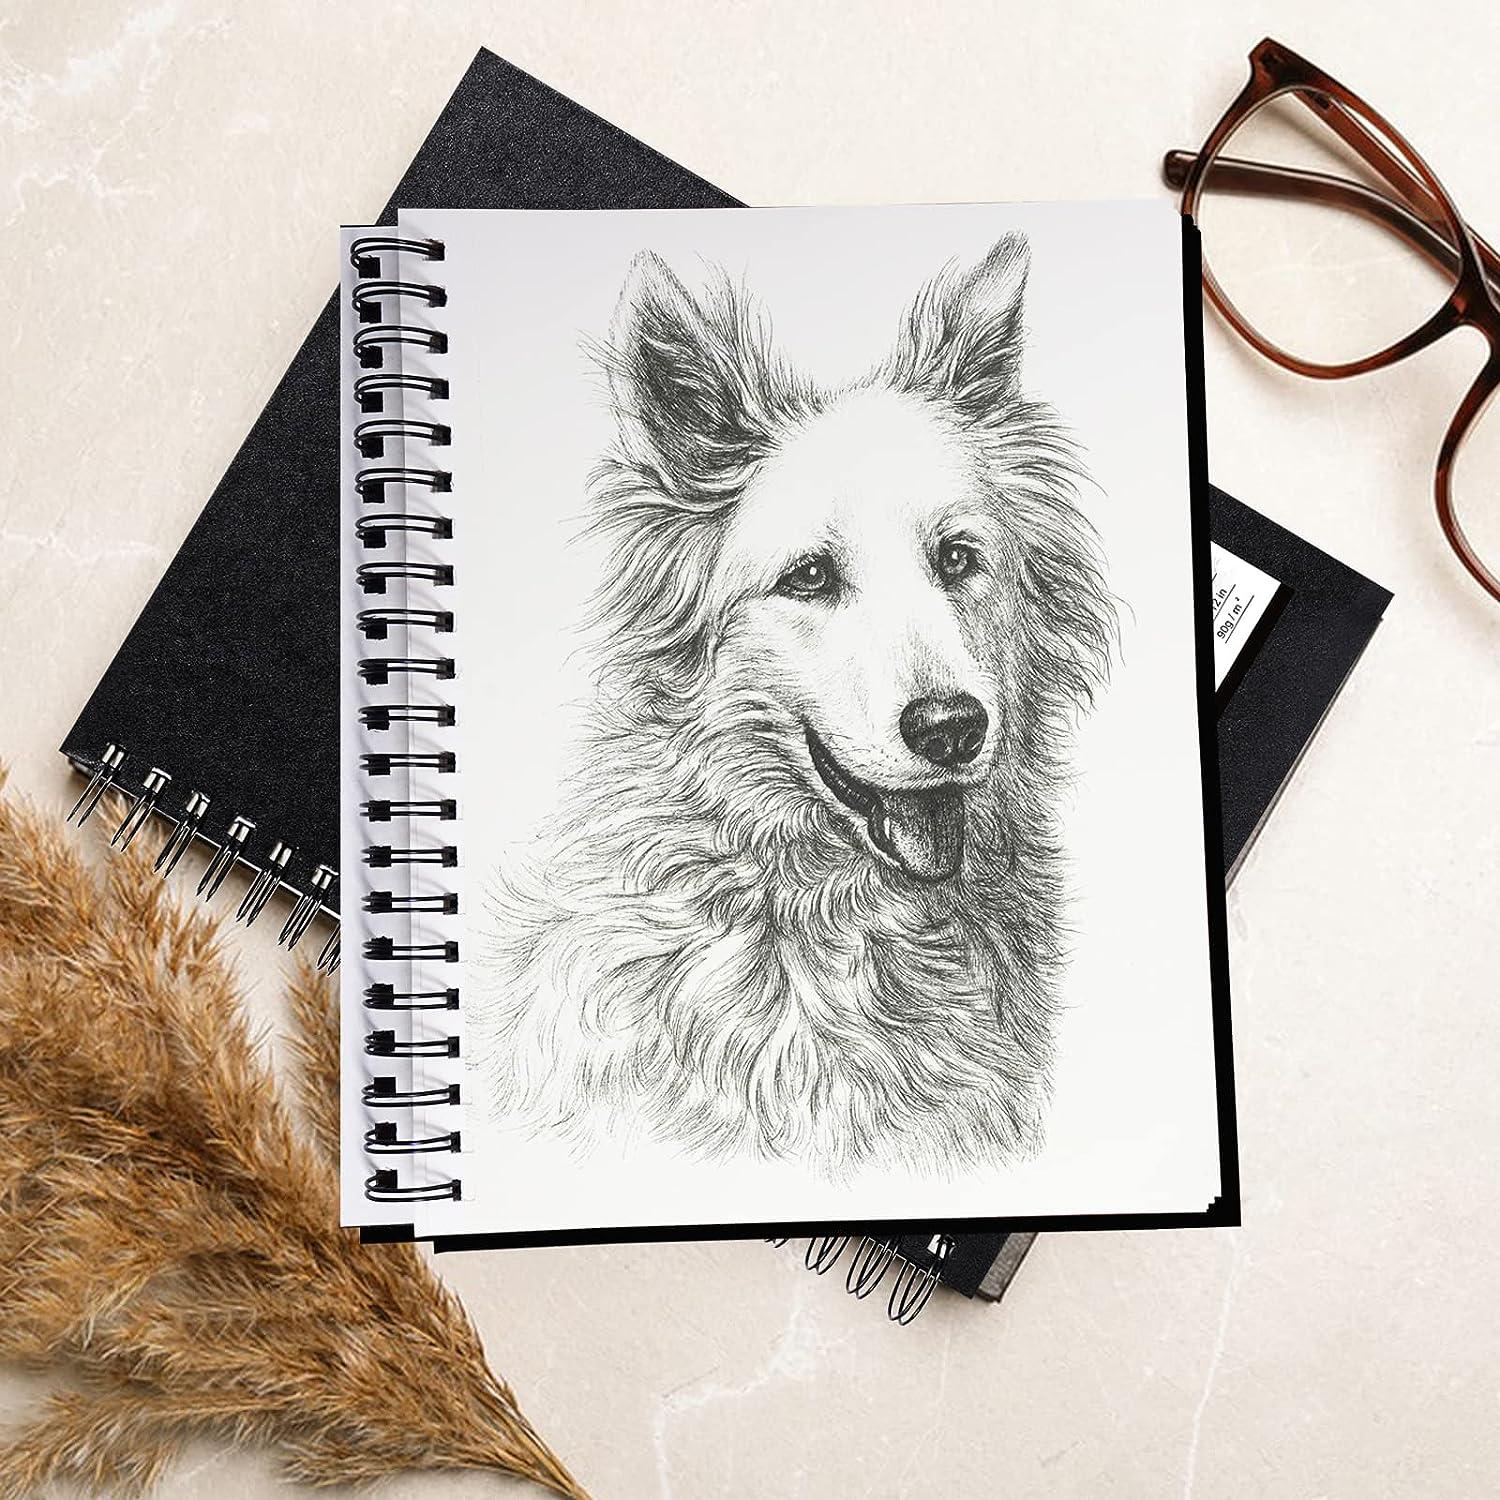 Sketchbook Black : Personalized Sketch Book 8.5x11 Gift for Adults